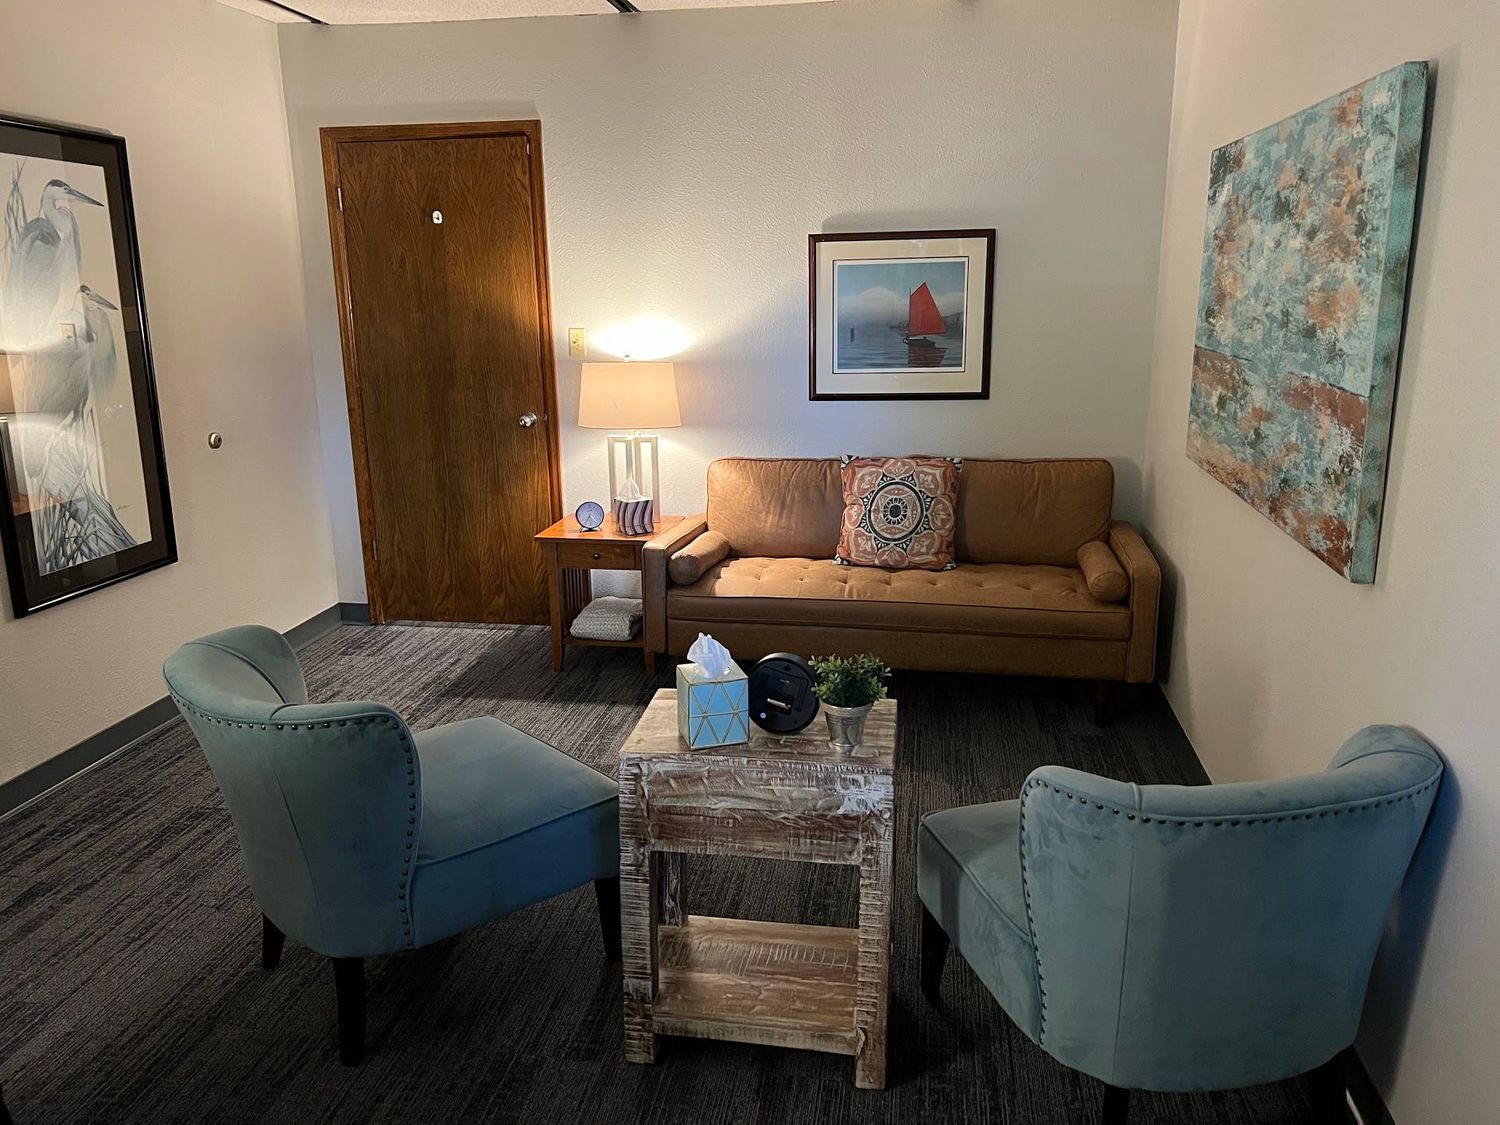 Gallery Photo of Therapy space at Arvada